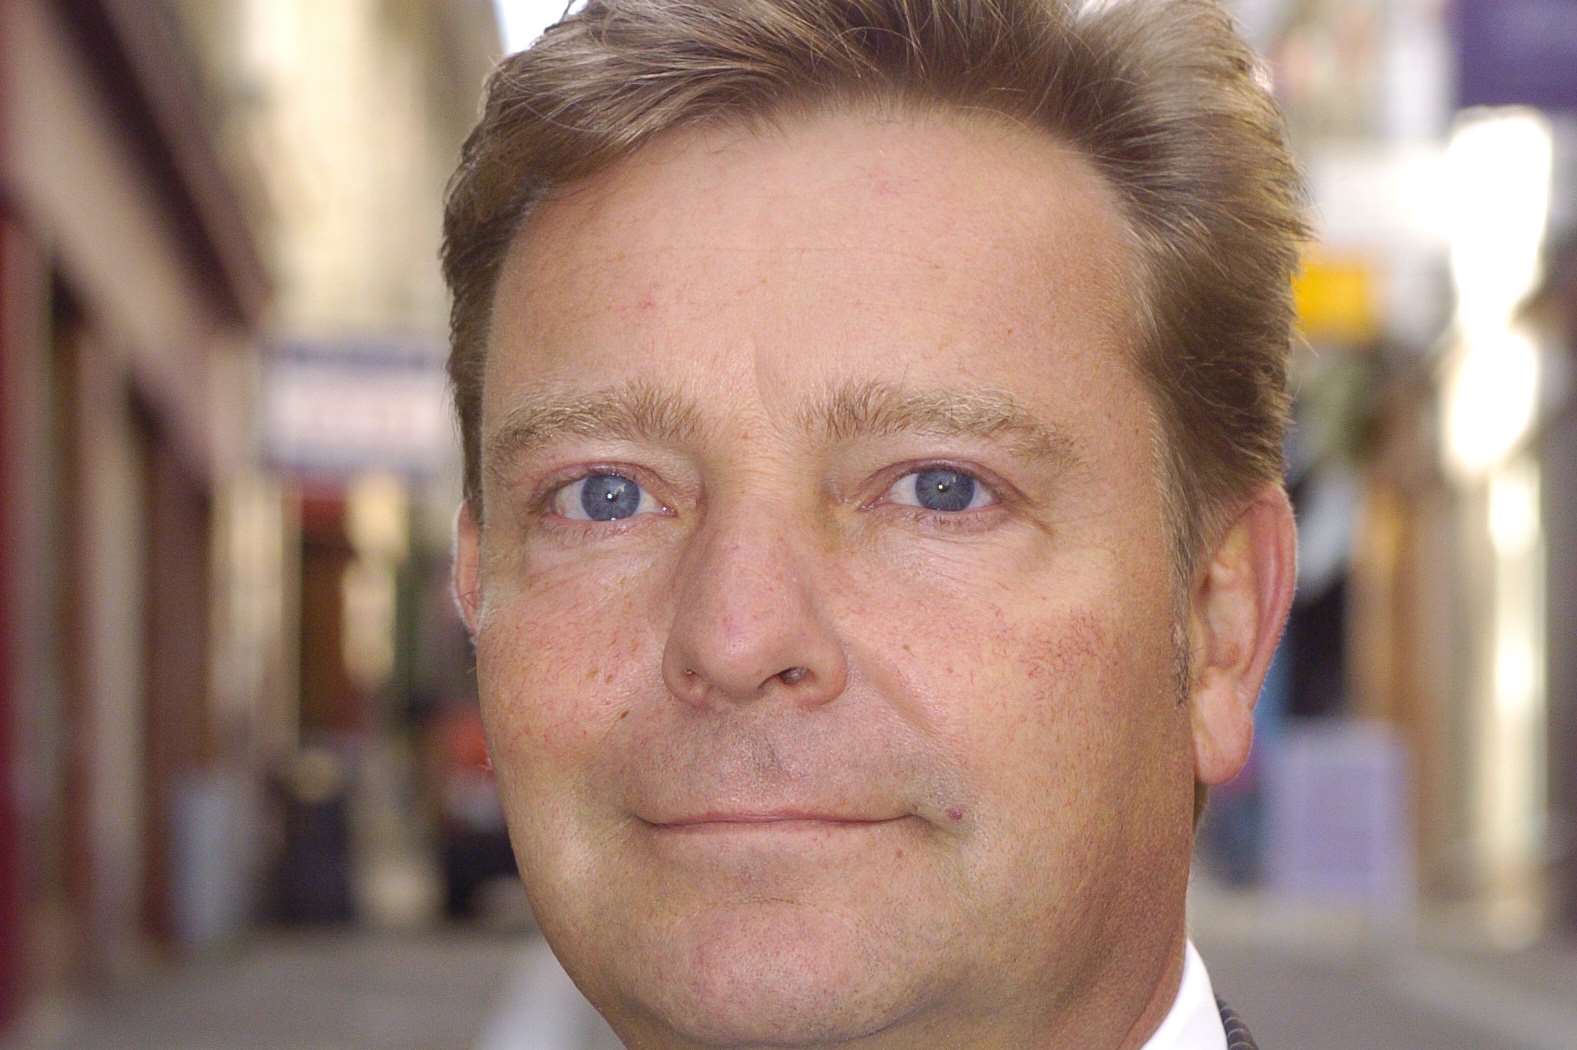 South Thanet MP Craig Mackinlay is "delighted" with EU referendum result